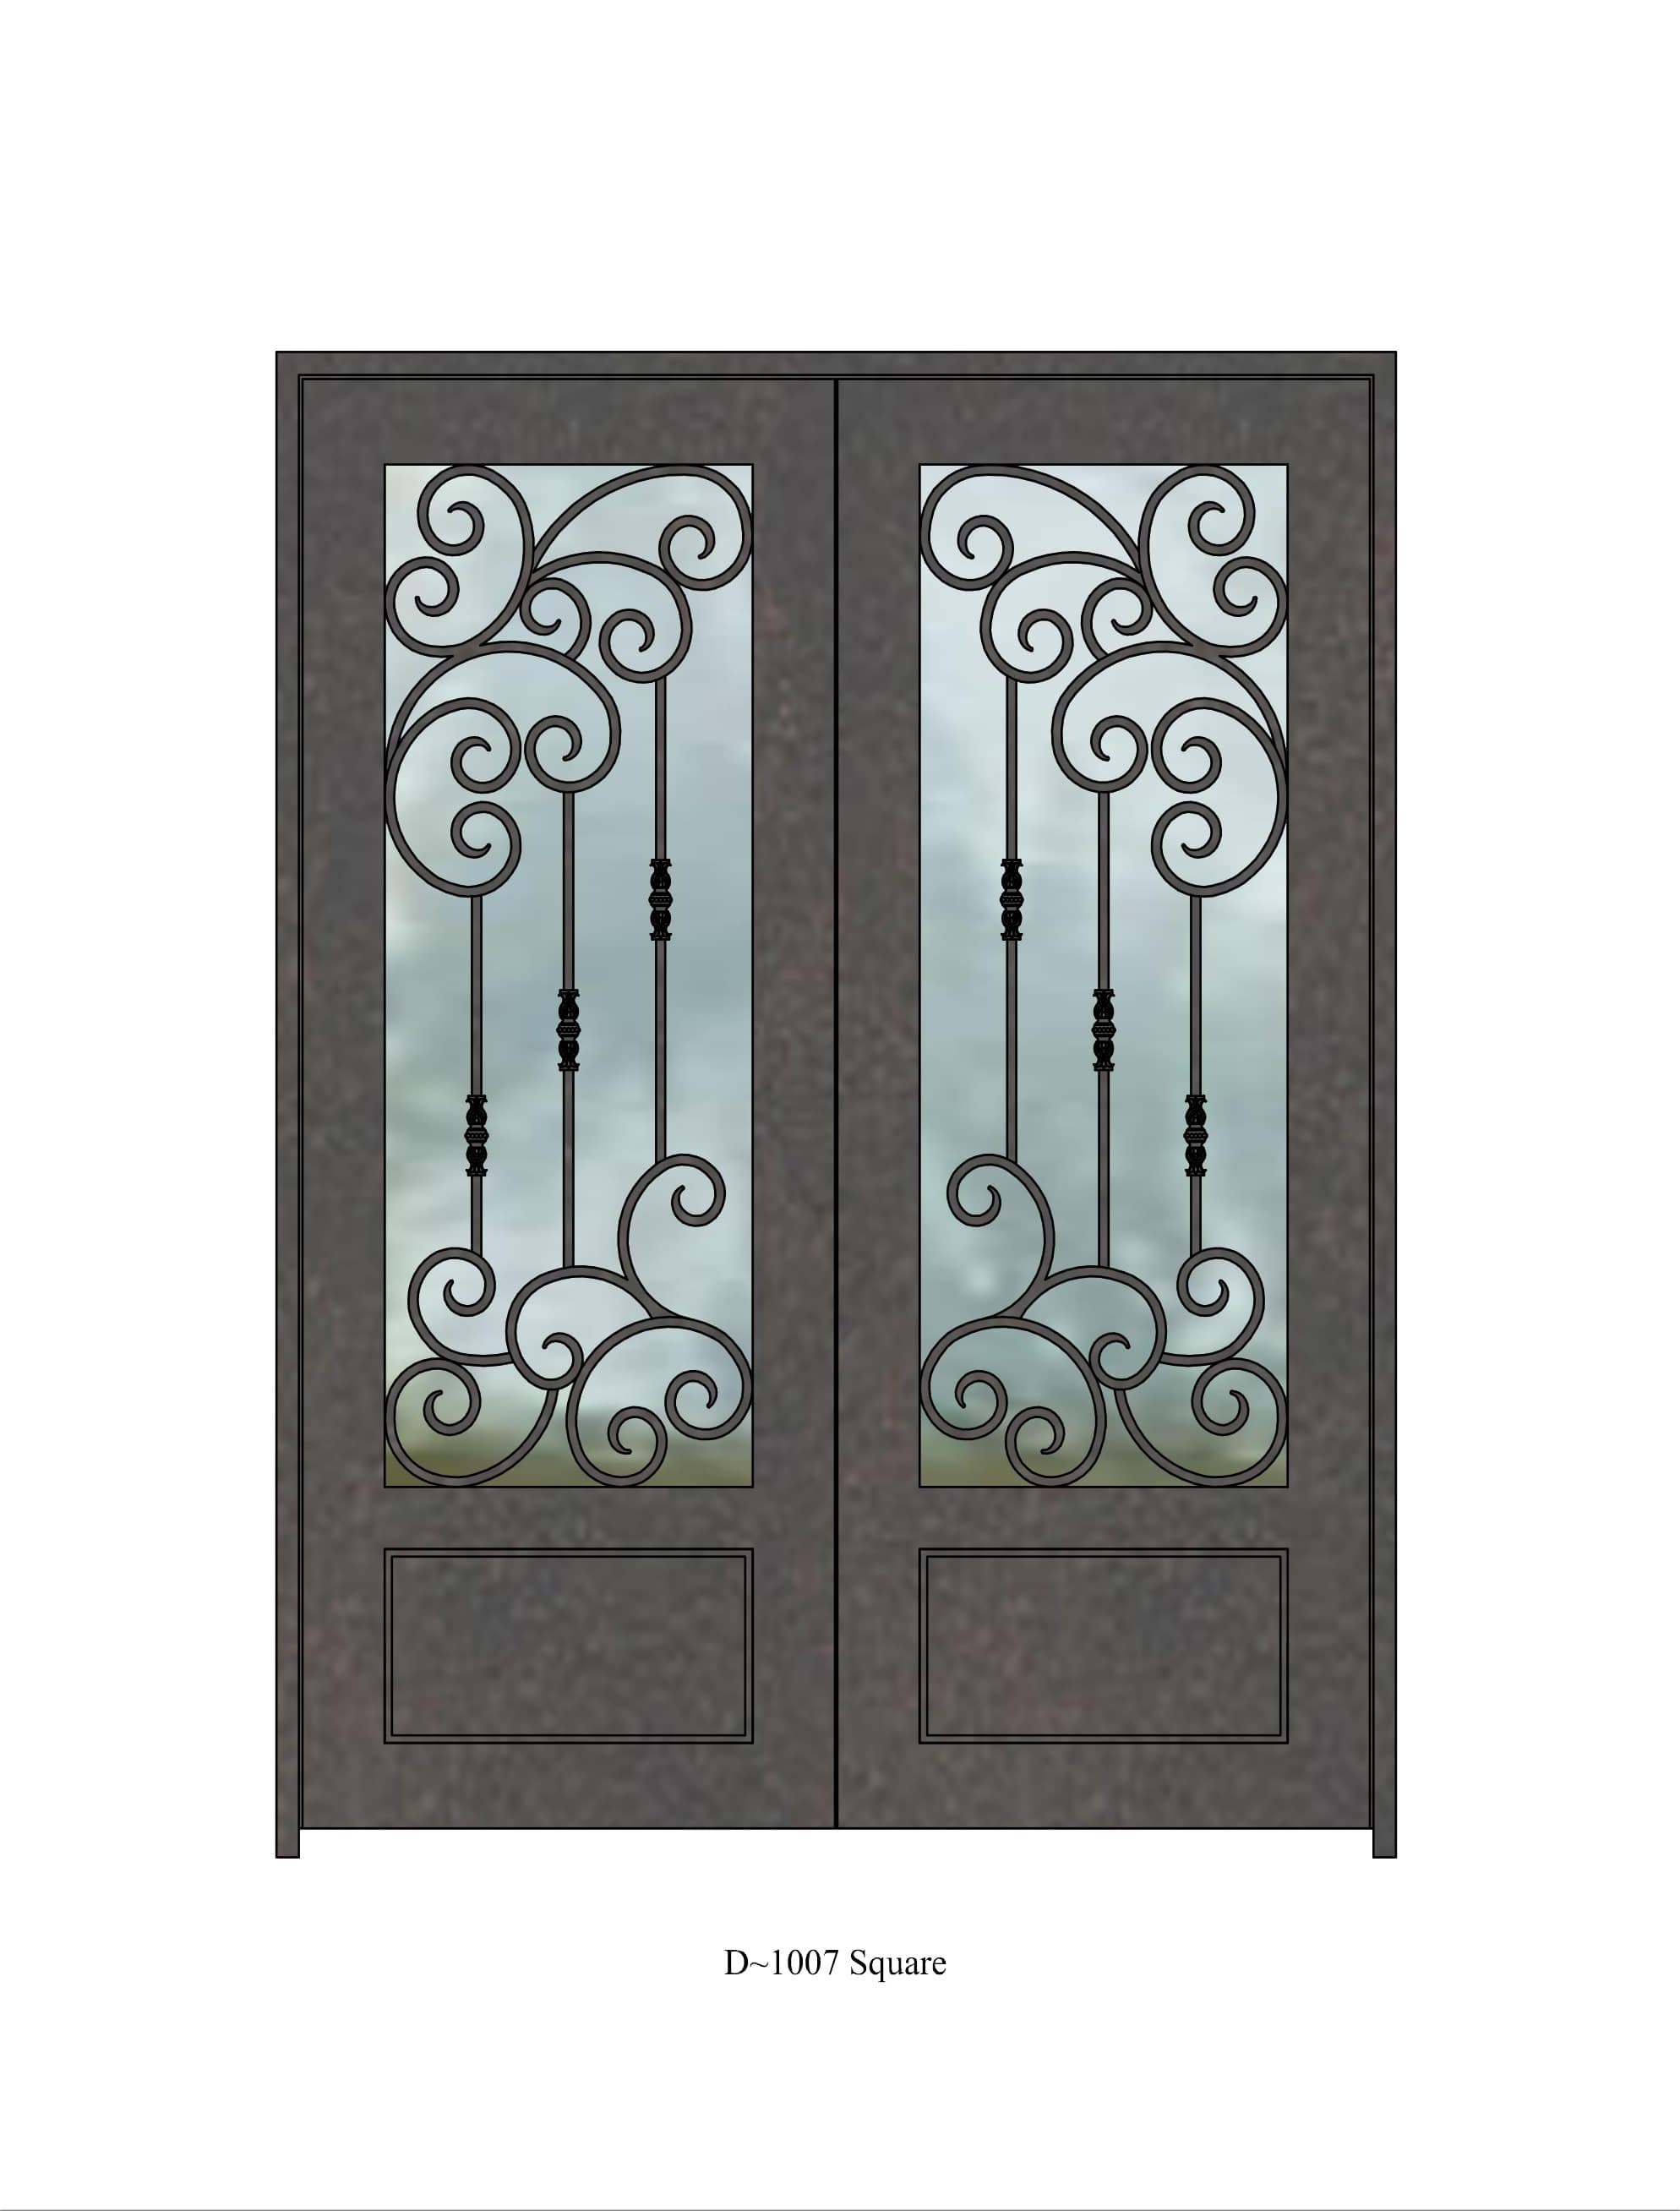 Square top iron door with large window and intricate pattern